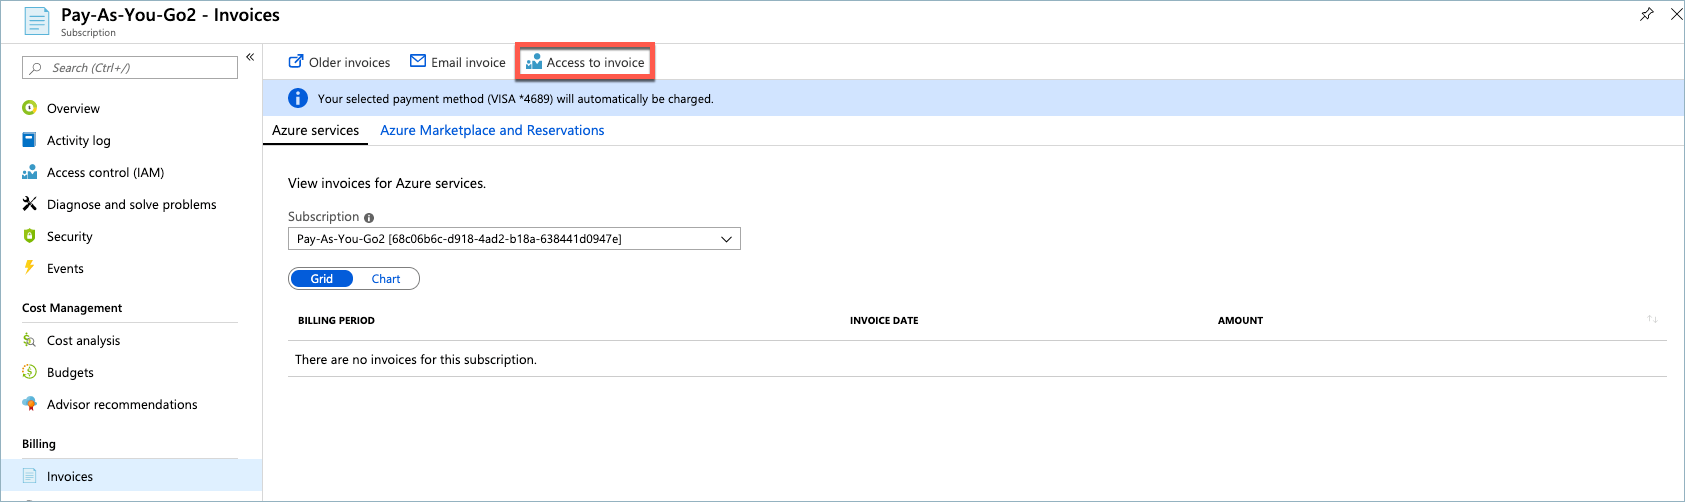 Screenshot shows how to delegate access to invoices.